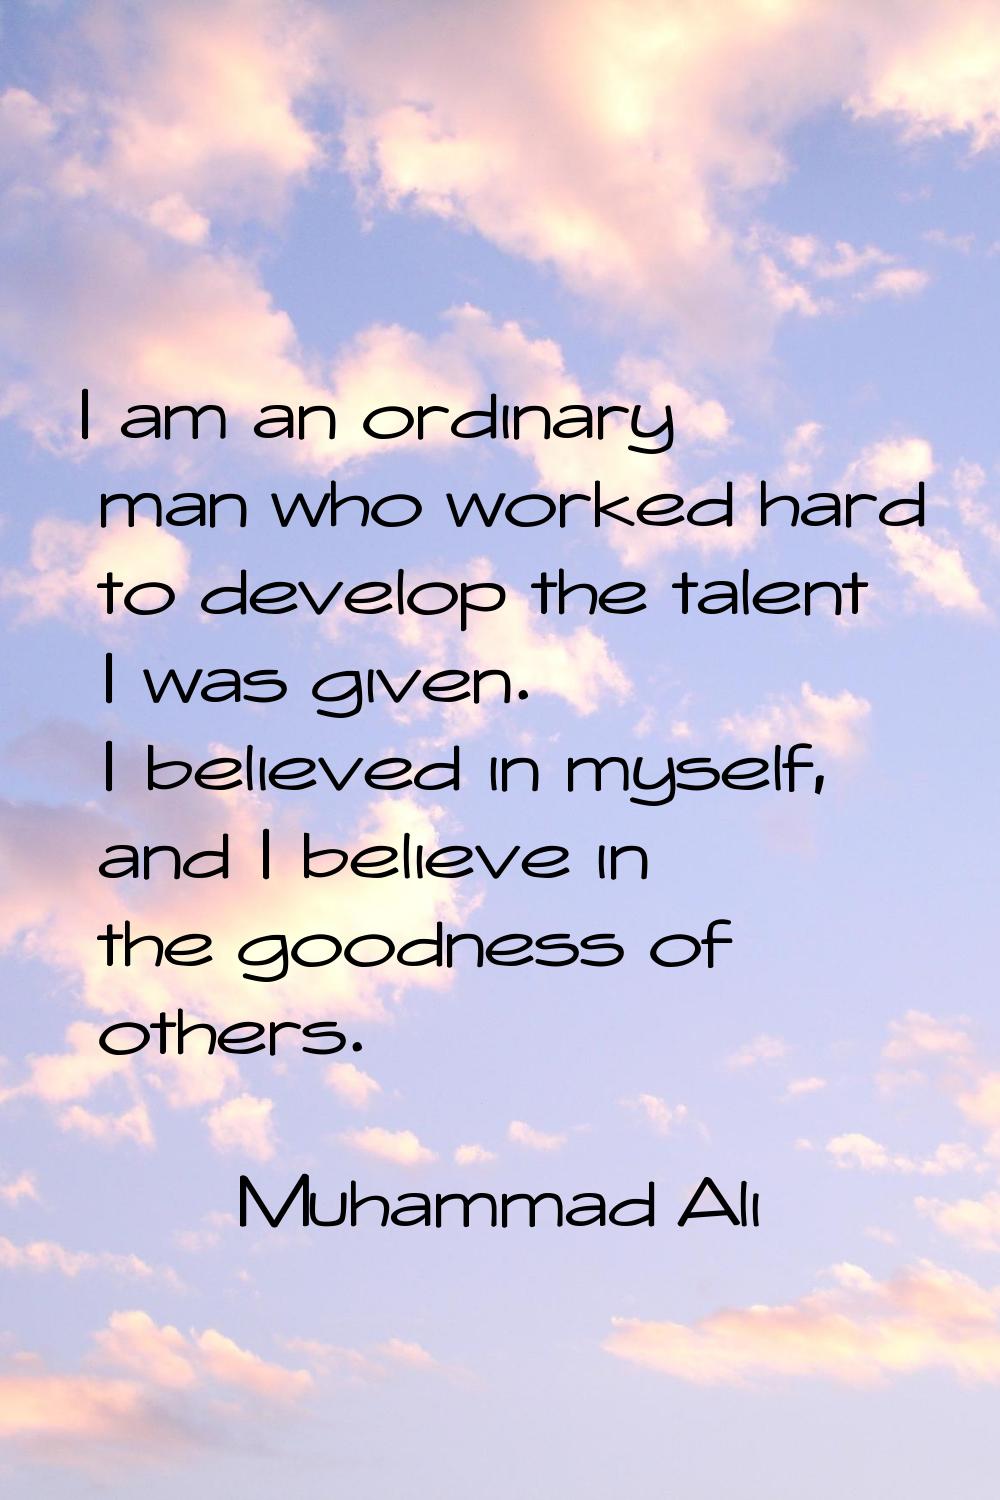 I am an ordinary man who worked hard to develop the talent I was given. I believed in myself, and I